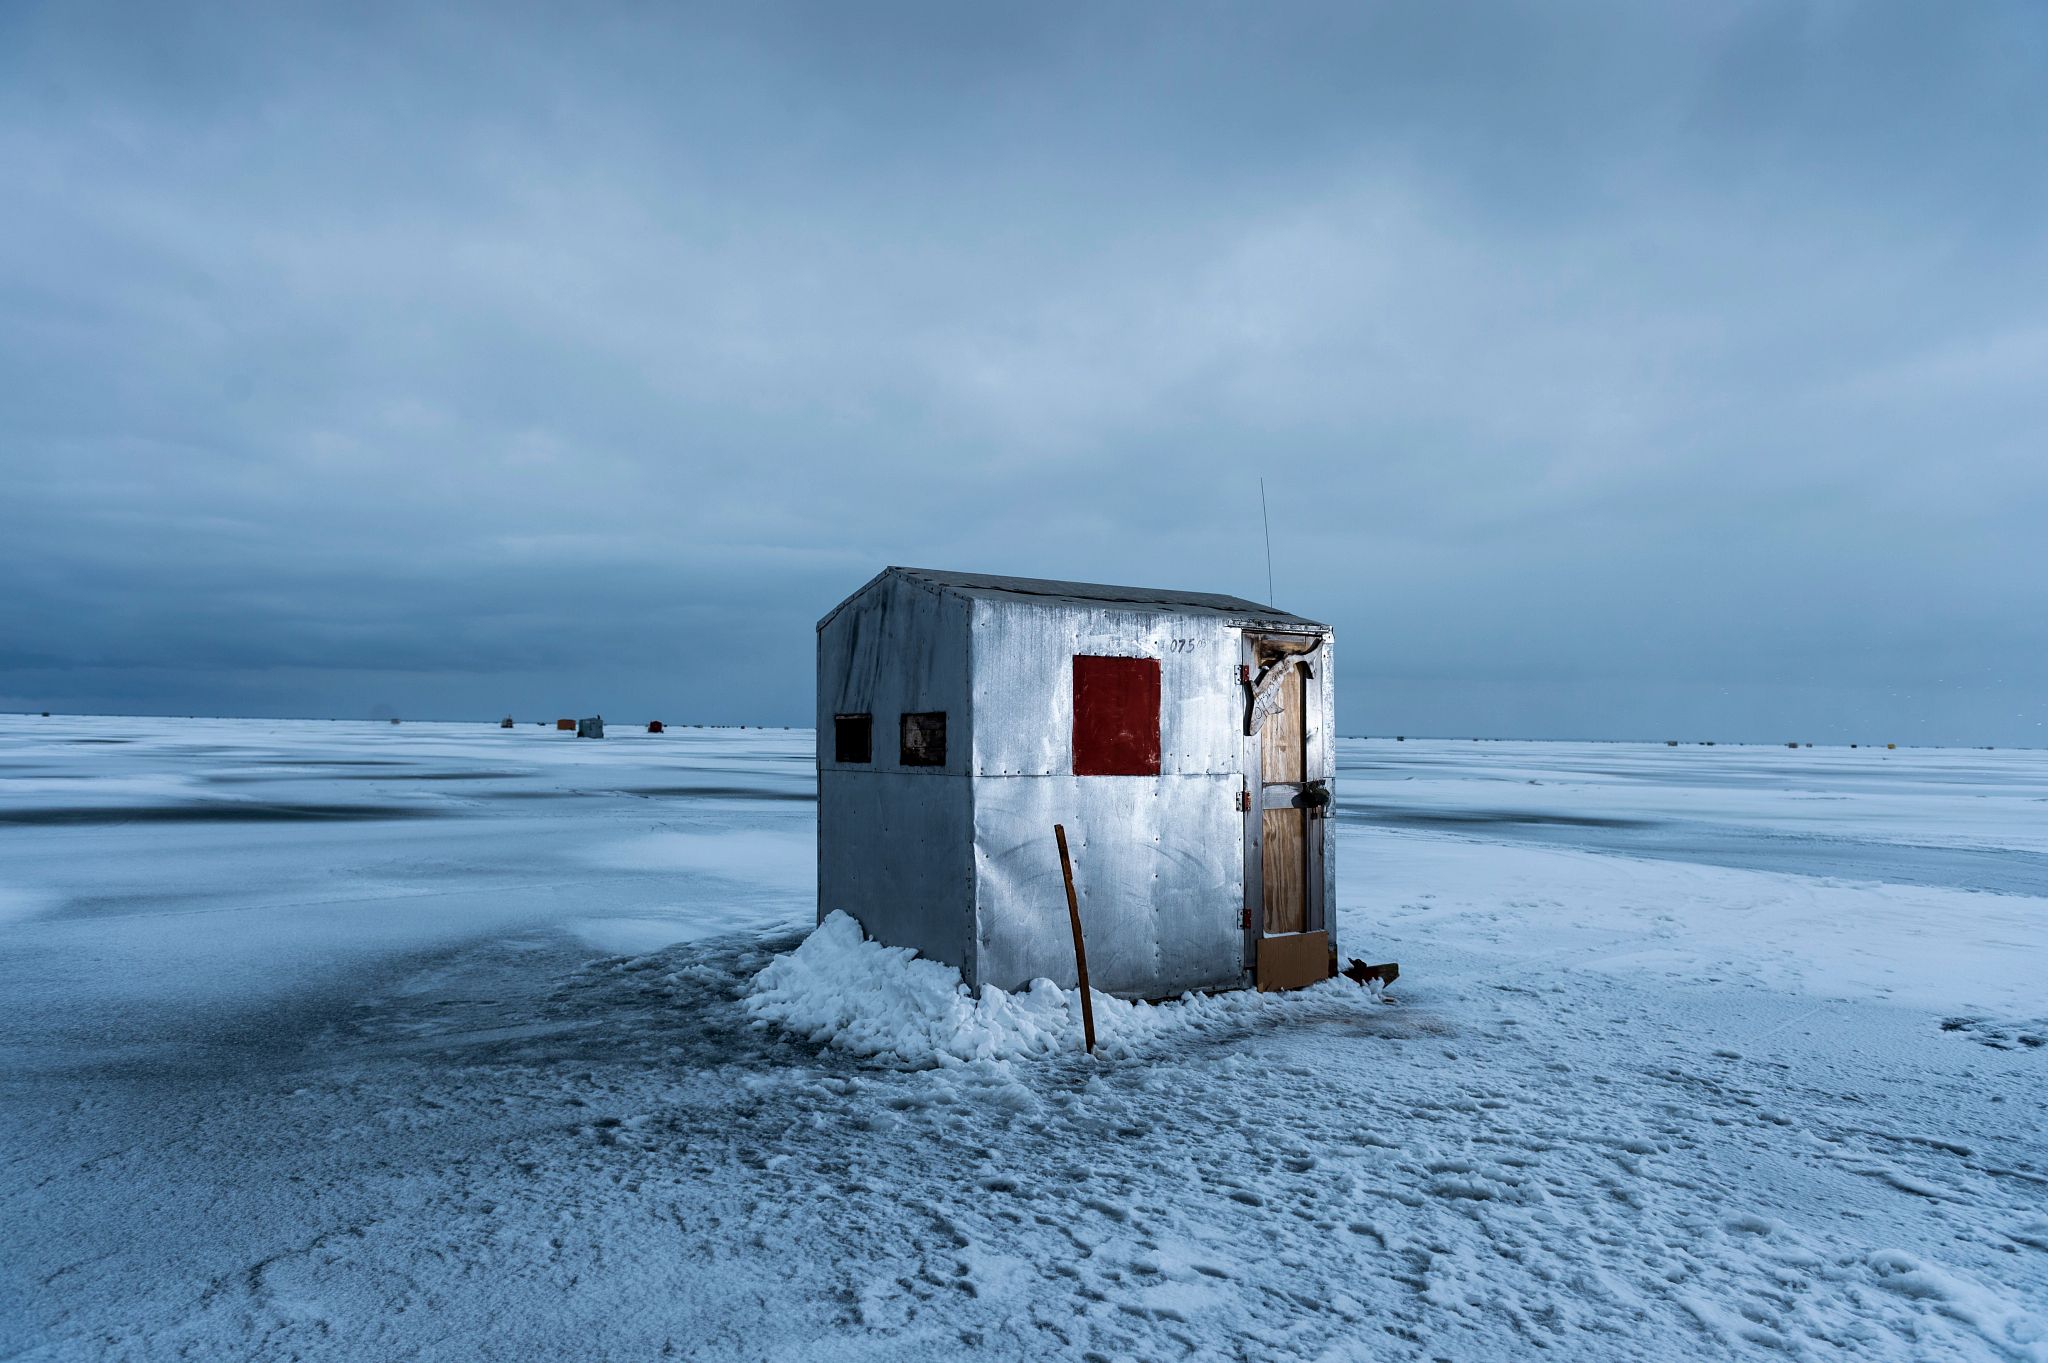 A silver ice shanty sits in the middle of an icy, snow-covered lake.